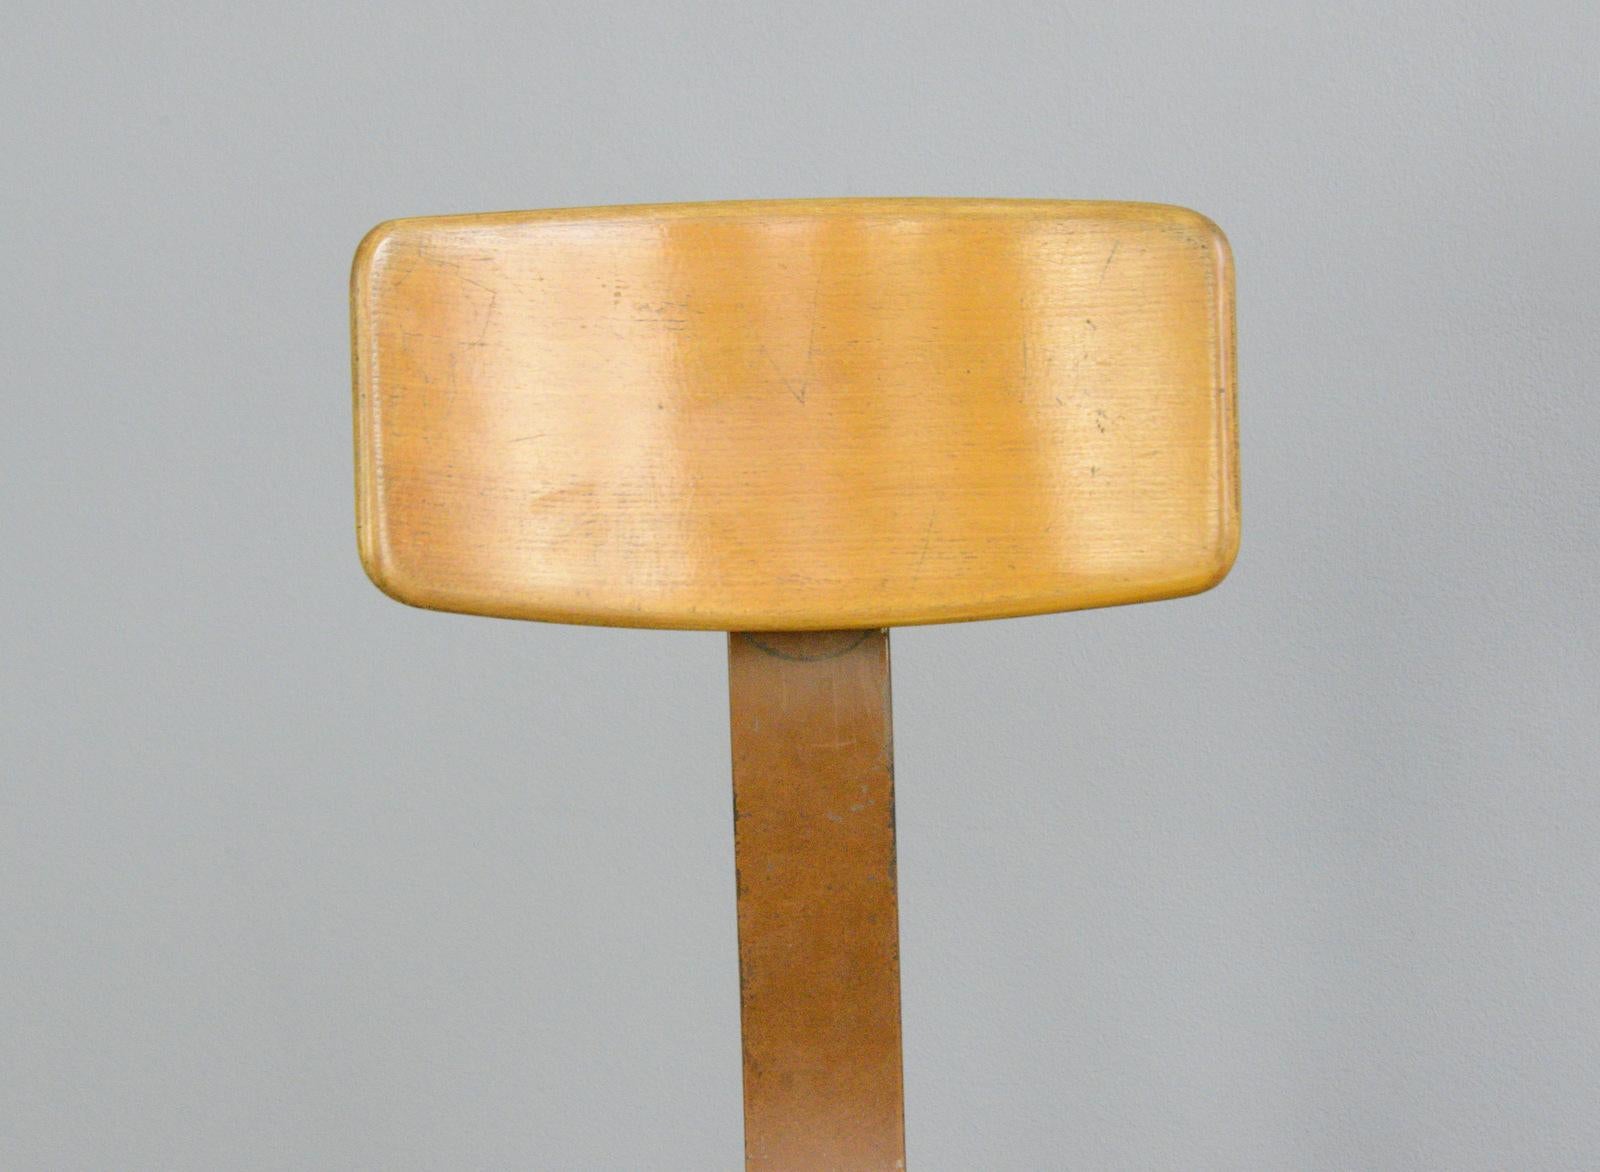 Ama Elastik factory chair, circa 1930s

- Sprung seat
- Height adjustable
- Shaped Ply seat
- Curved ply backrest
- Original maker decal on the backrest
- Made by Ama Elastik
- German, 1930s
- Measures: 40cm wide x 48cm deep x 93cm tall
-